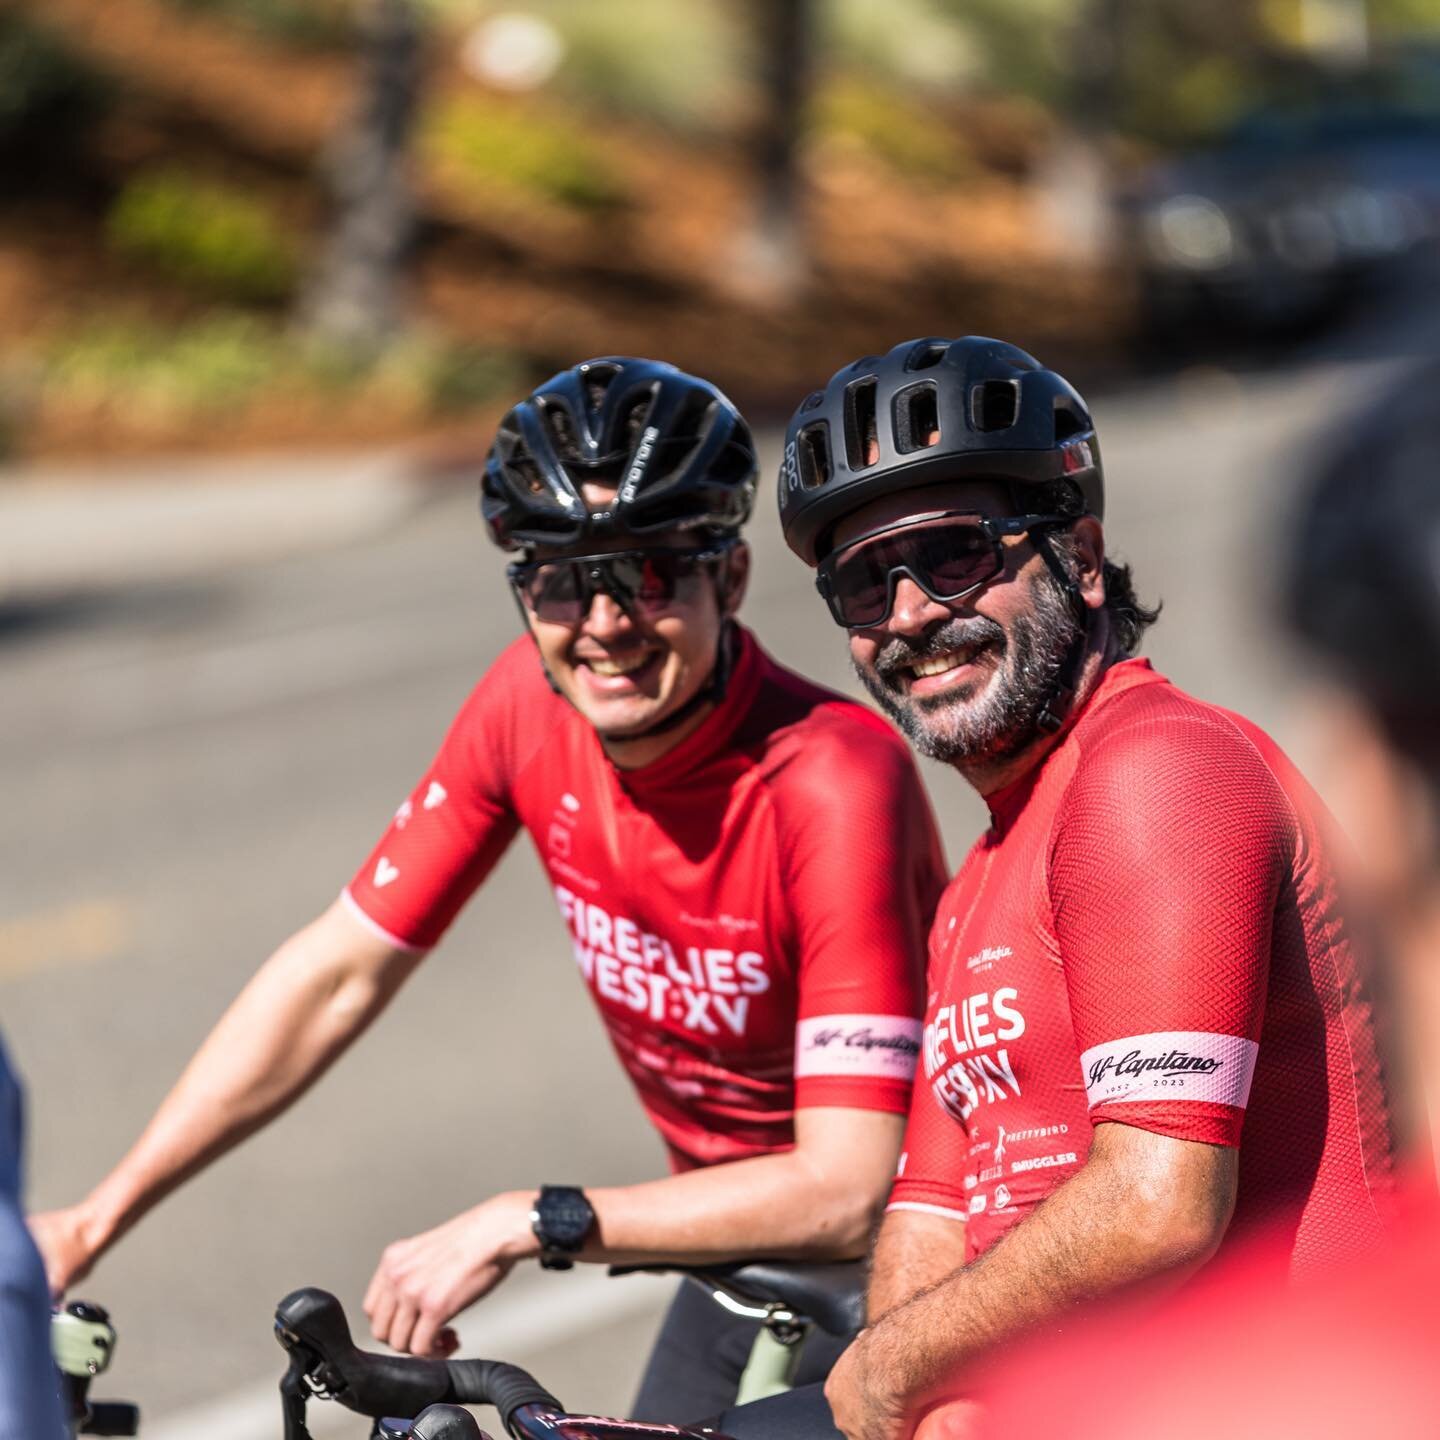 Day 2 Amazing roads and cooler temps bring some smiles. Photo by: @mattharbicht for Fireflies West

#forthosewhosufferweride #fireflieswest2023 #cityofhope #fireflieswest #firefliescc